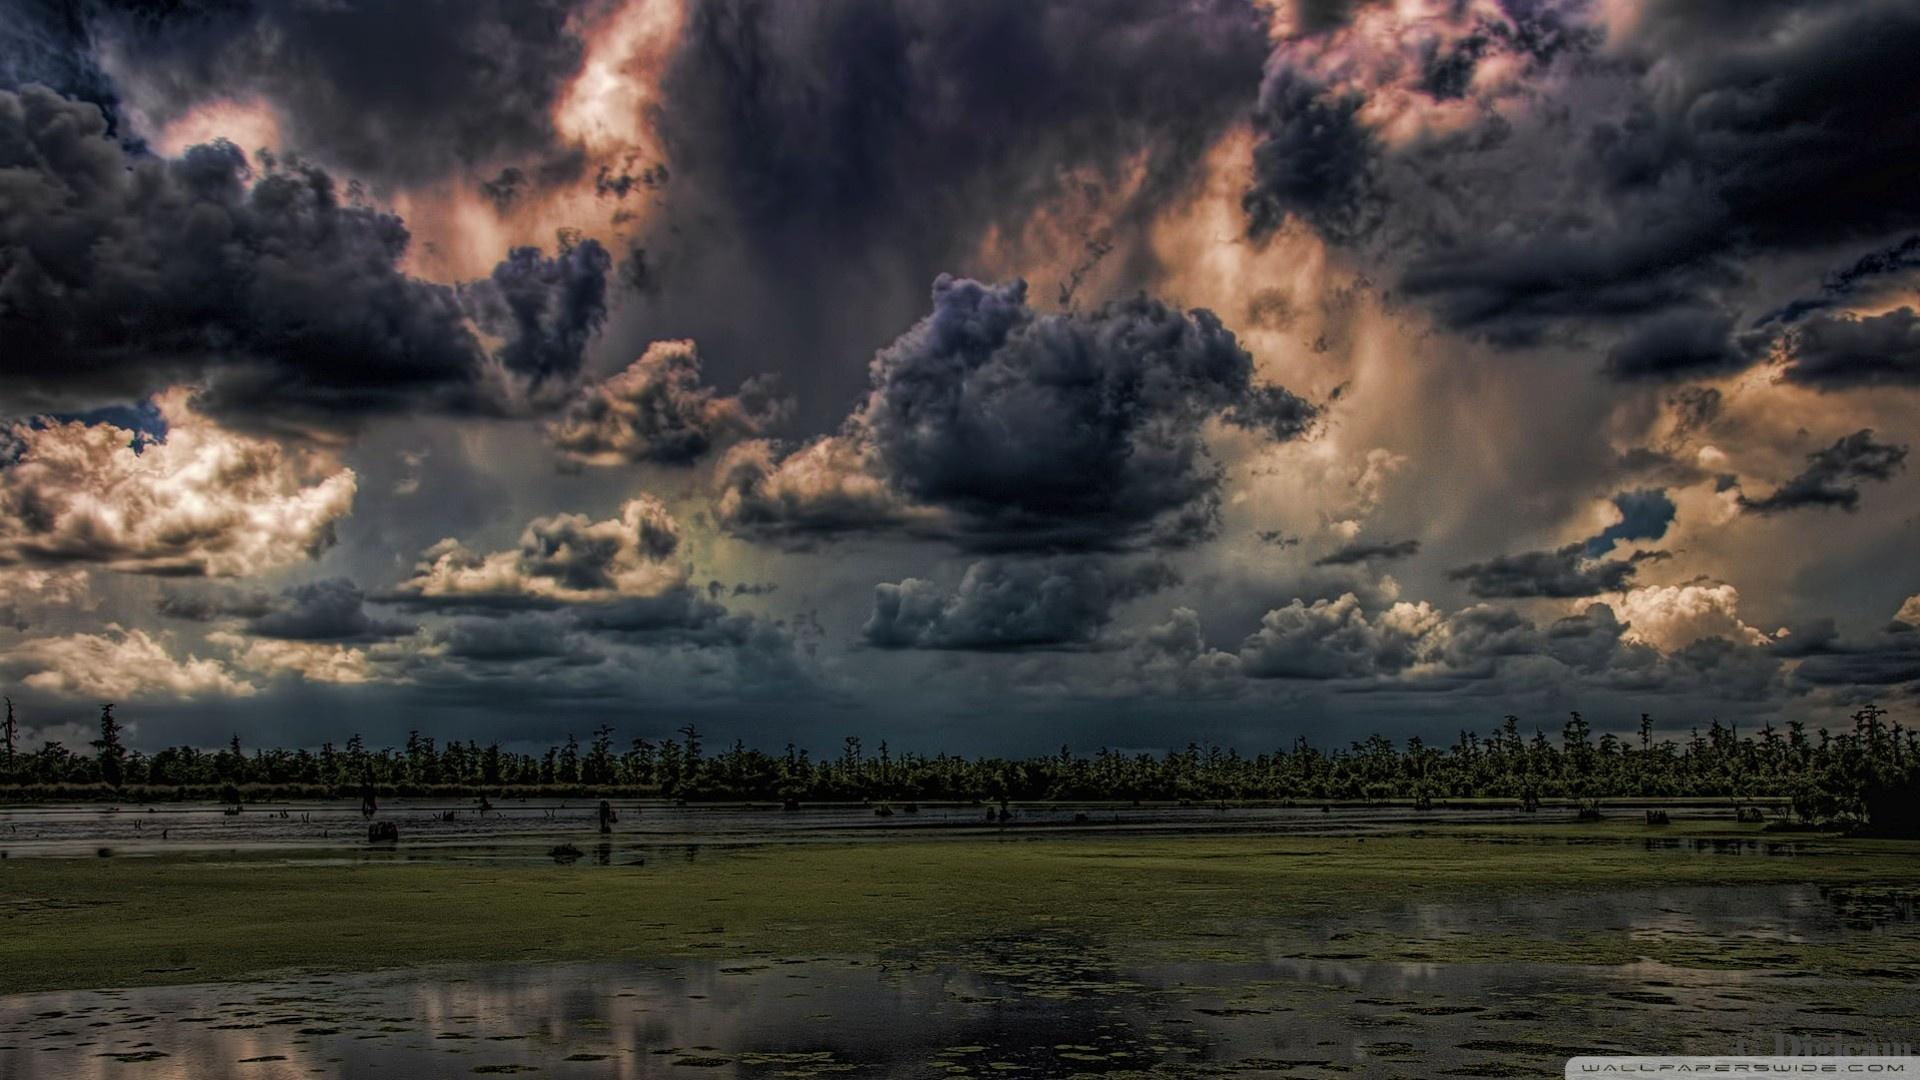 Mean Skies Hdr, trees, swamp, dark clouds, 3d and abstract